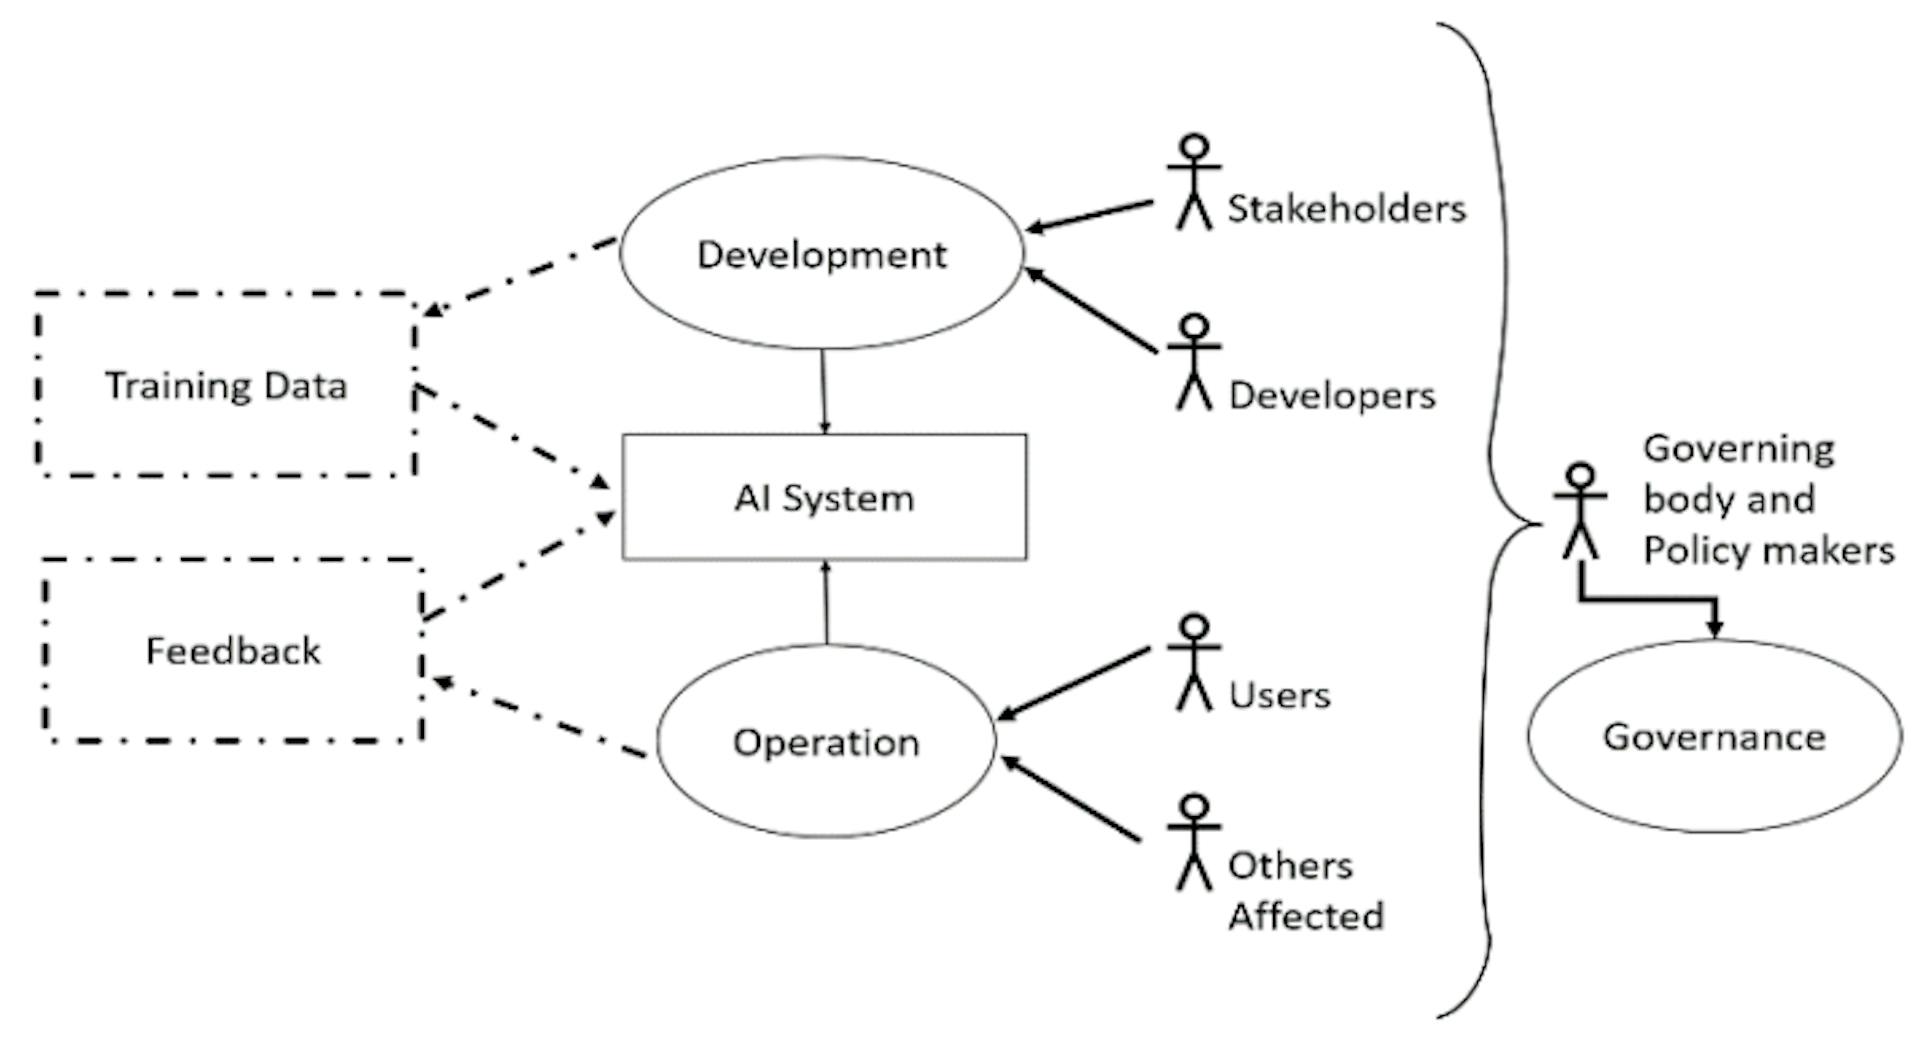 Fig 3. Elements of the User Story Template